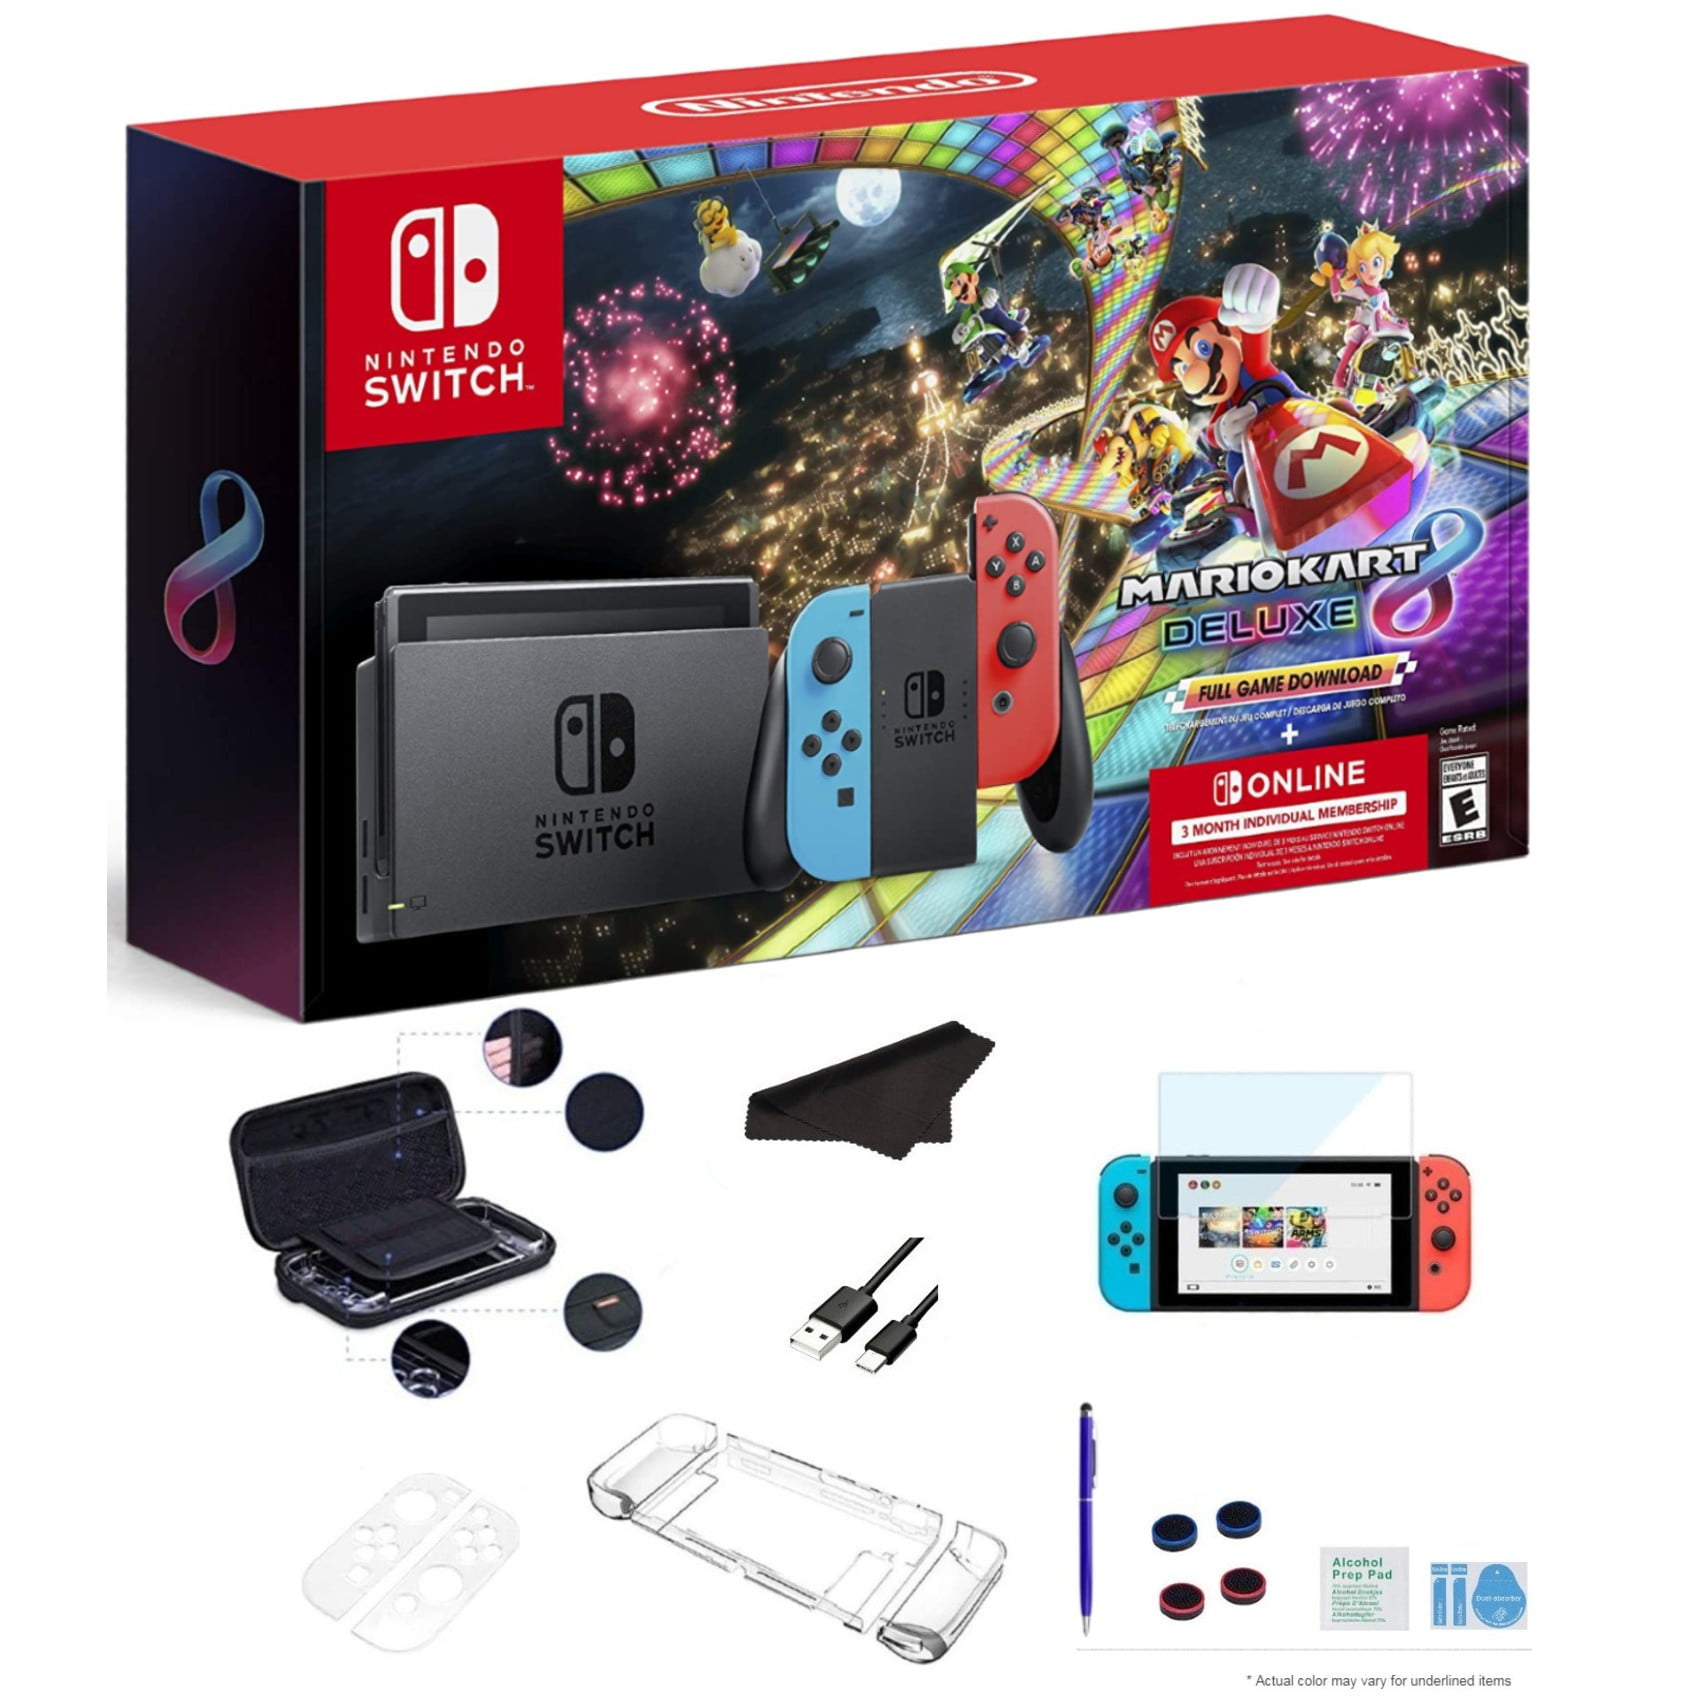 Nintendo Switch Console Wildcat Bundle Fortnite Special Edition 32GB  Console - Yellow and Blue Joy-Con, Extra External 64GB Storage and Ultimate